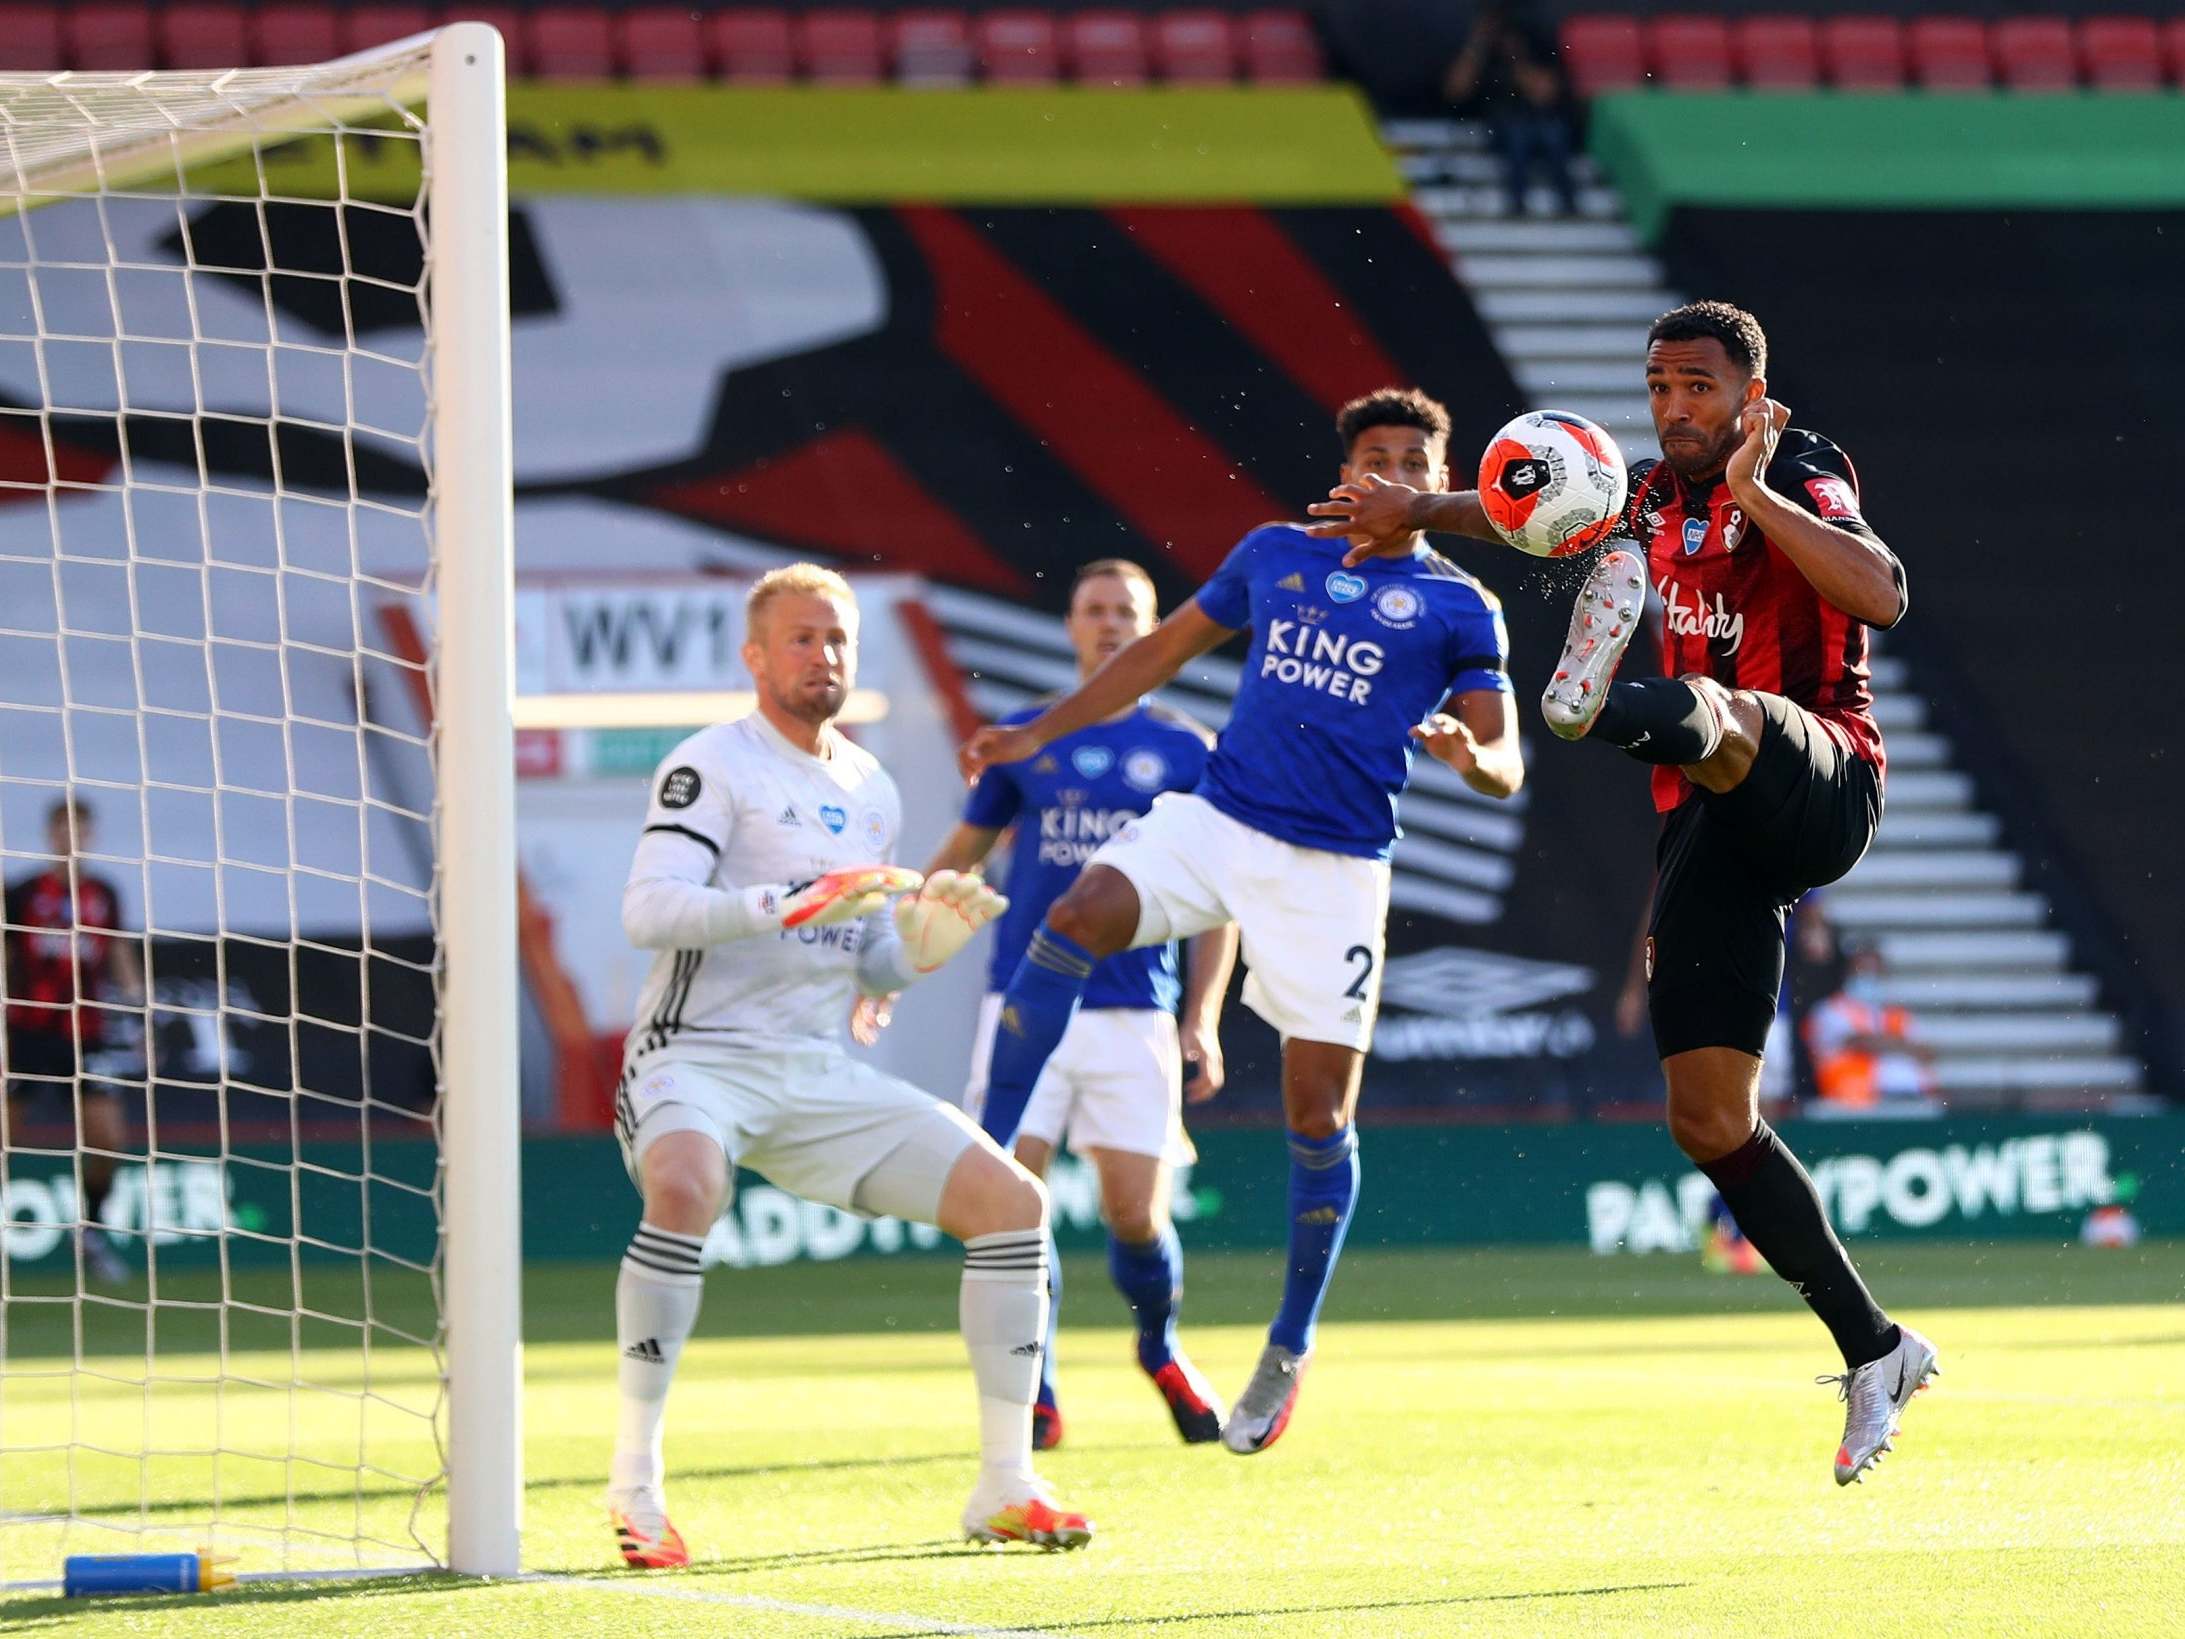 Bournemouth vs Leicester LIVE: Latest score, goals and updates from Premier League fixture today